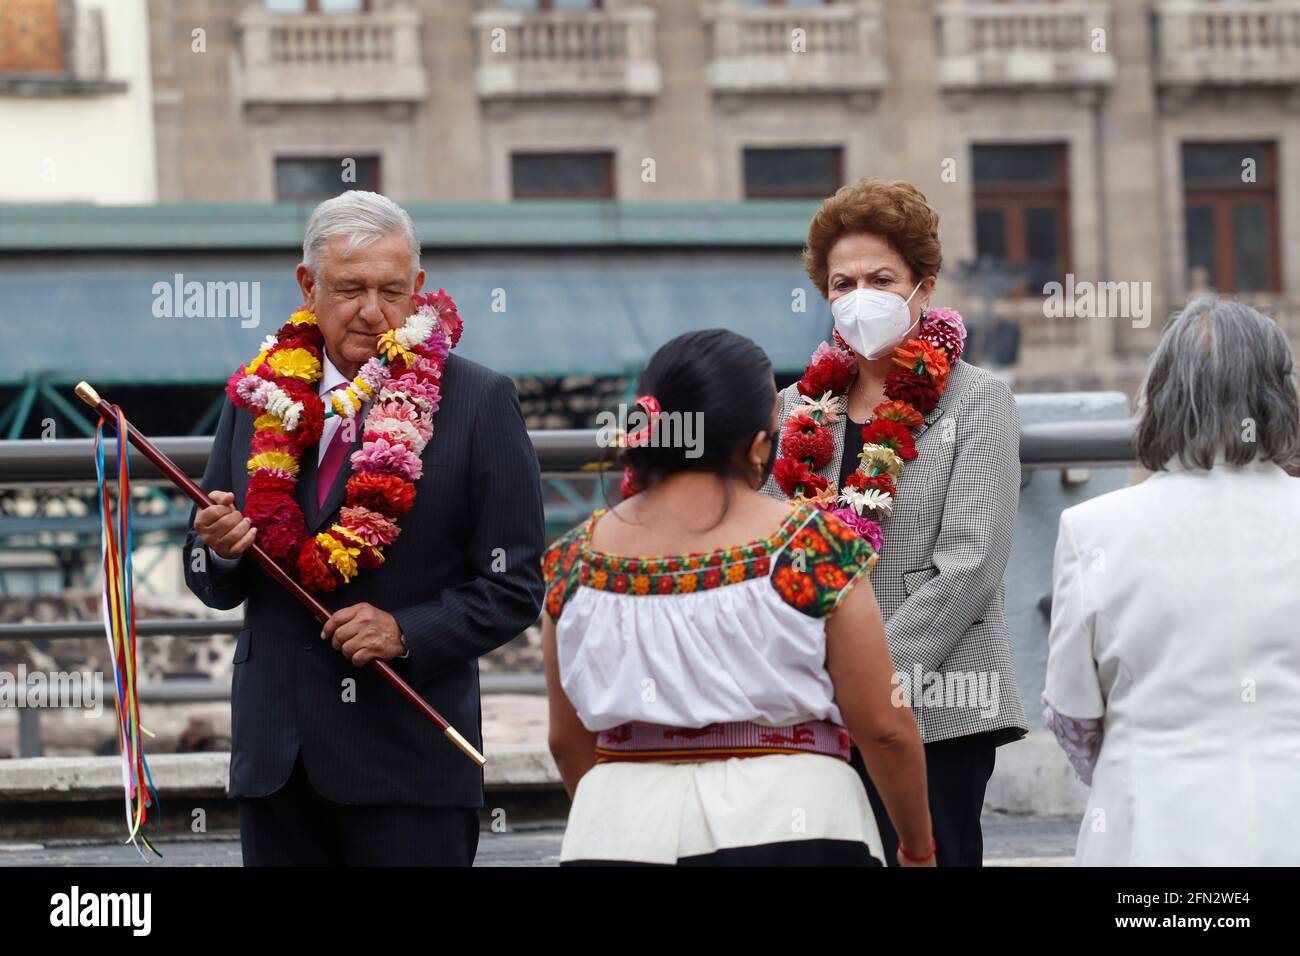 Mexico City, Mexico. 13th May, 2021. MEXICO CITY, MEXICO - MAY 13: Mexico's President, Andres Manuel Lopez Obrador, accompanied by the former president of Brazil, Dilma Rousseff, during the ceremony 'Mexico - Tenochtitlan, more than seven centuries of history' at the Museo del Templo Mayor on May 13, 2021 in Mexico City, Mexico. (Photo by Eyepix/Sipa USA) Credit: Sipa USA/Alamy Live News Stock Photo